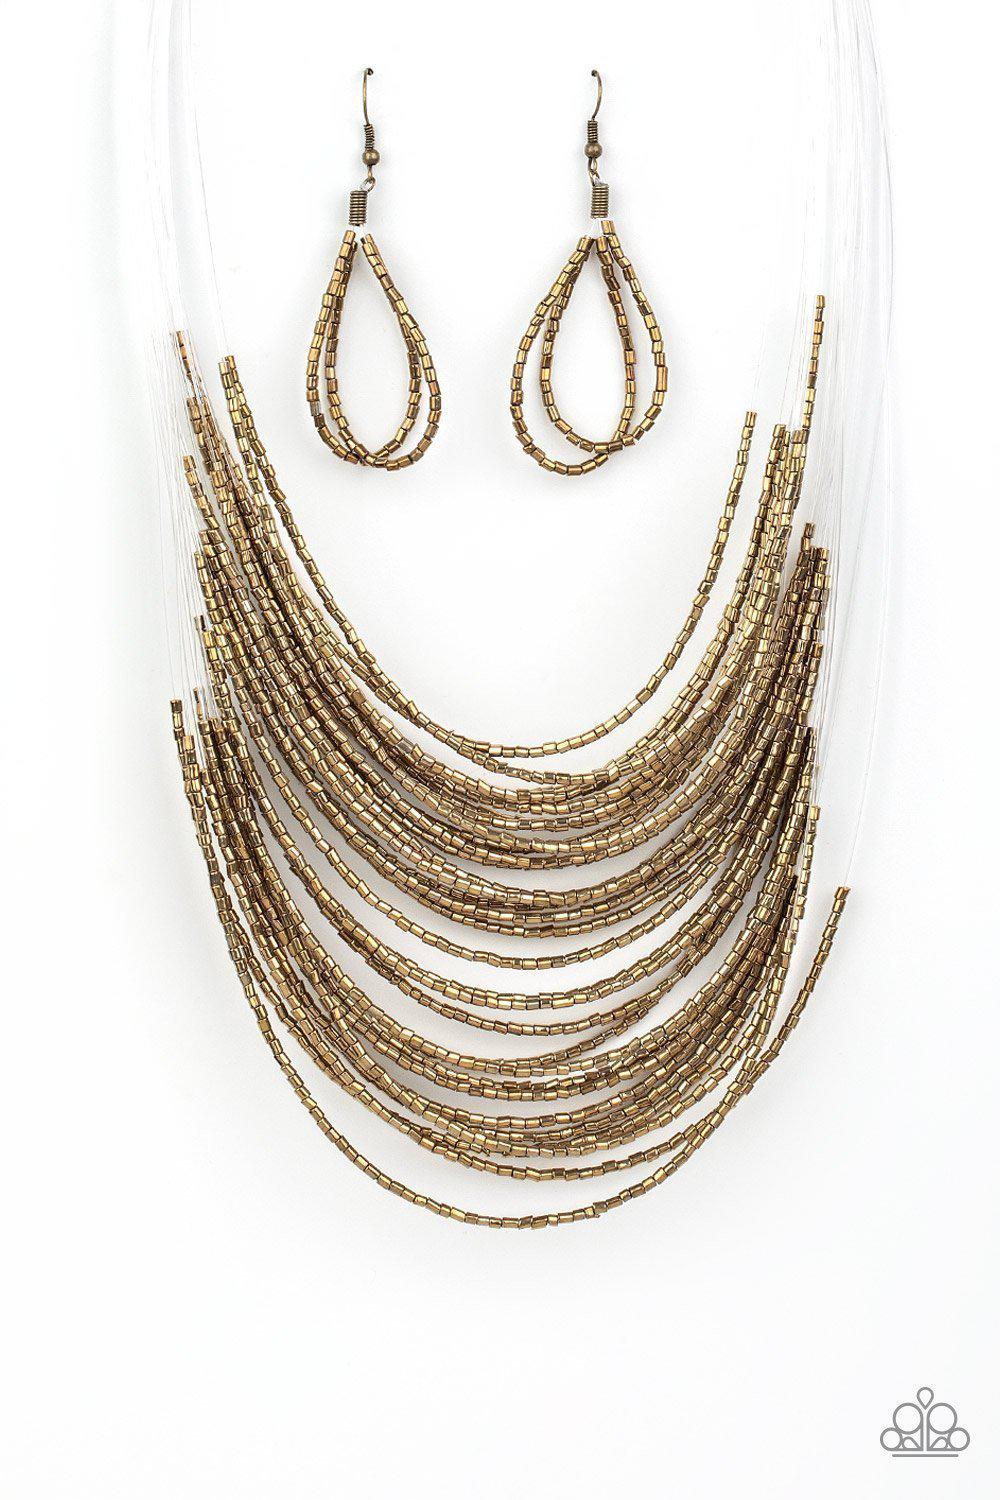 Catwalk Queen Brass Seed Bead Necklace - Paparazzi Accessories-CarasShop.com - $5 Jewelry by Cara Jewels